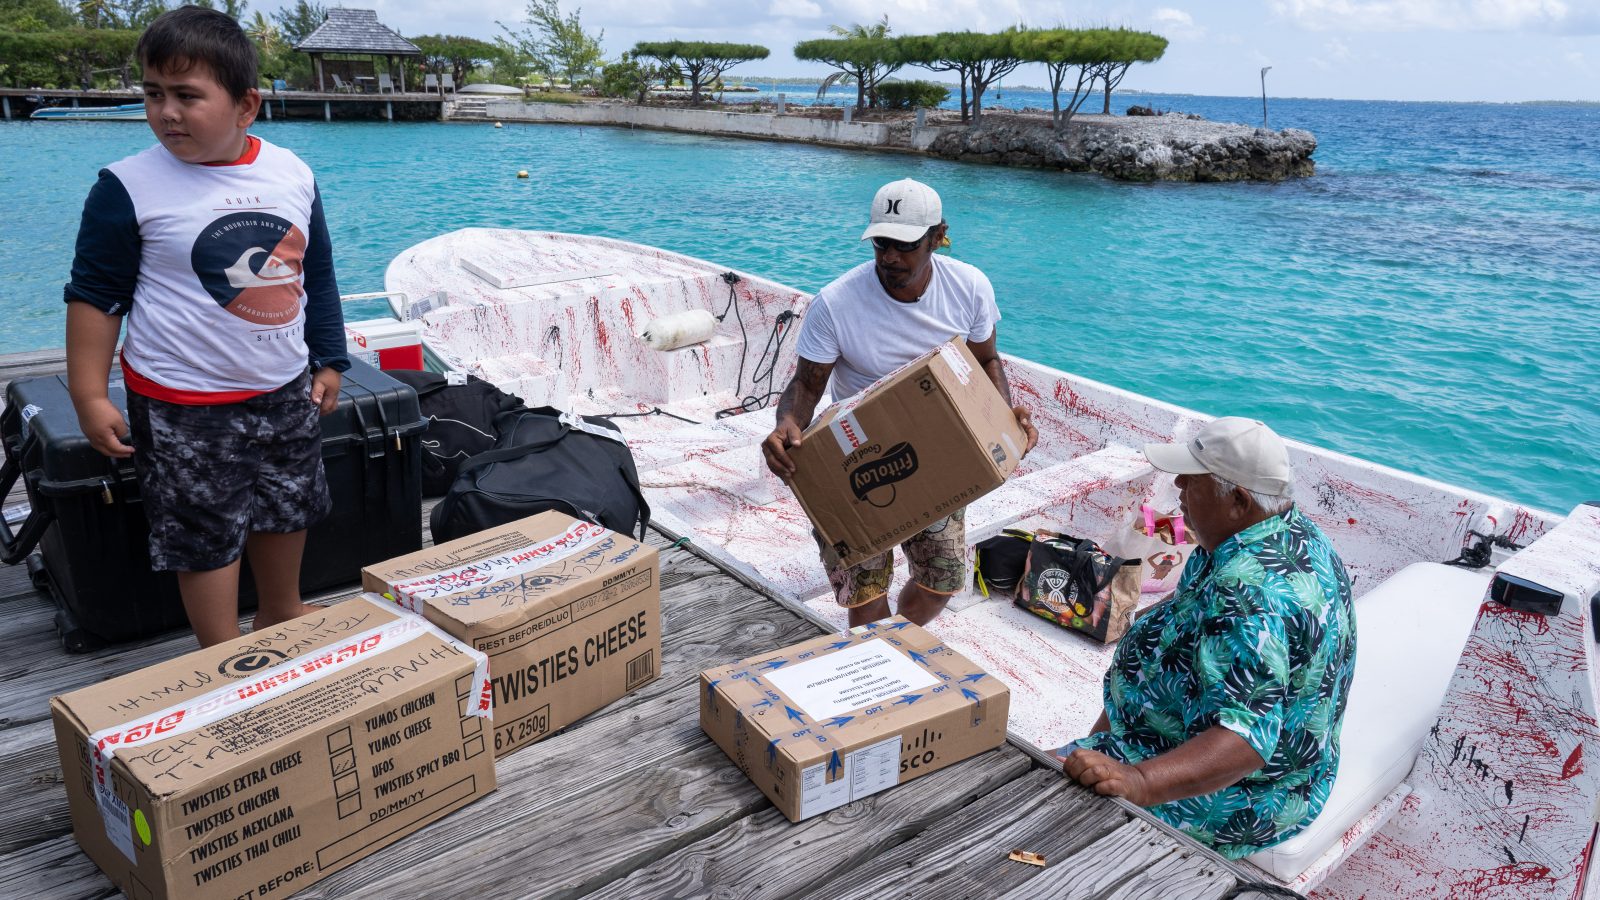 No Amazon? No problem: How a remote island community built its own online shopping service